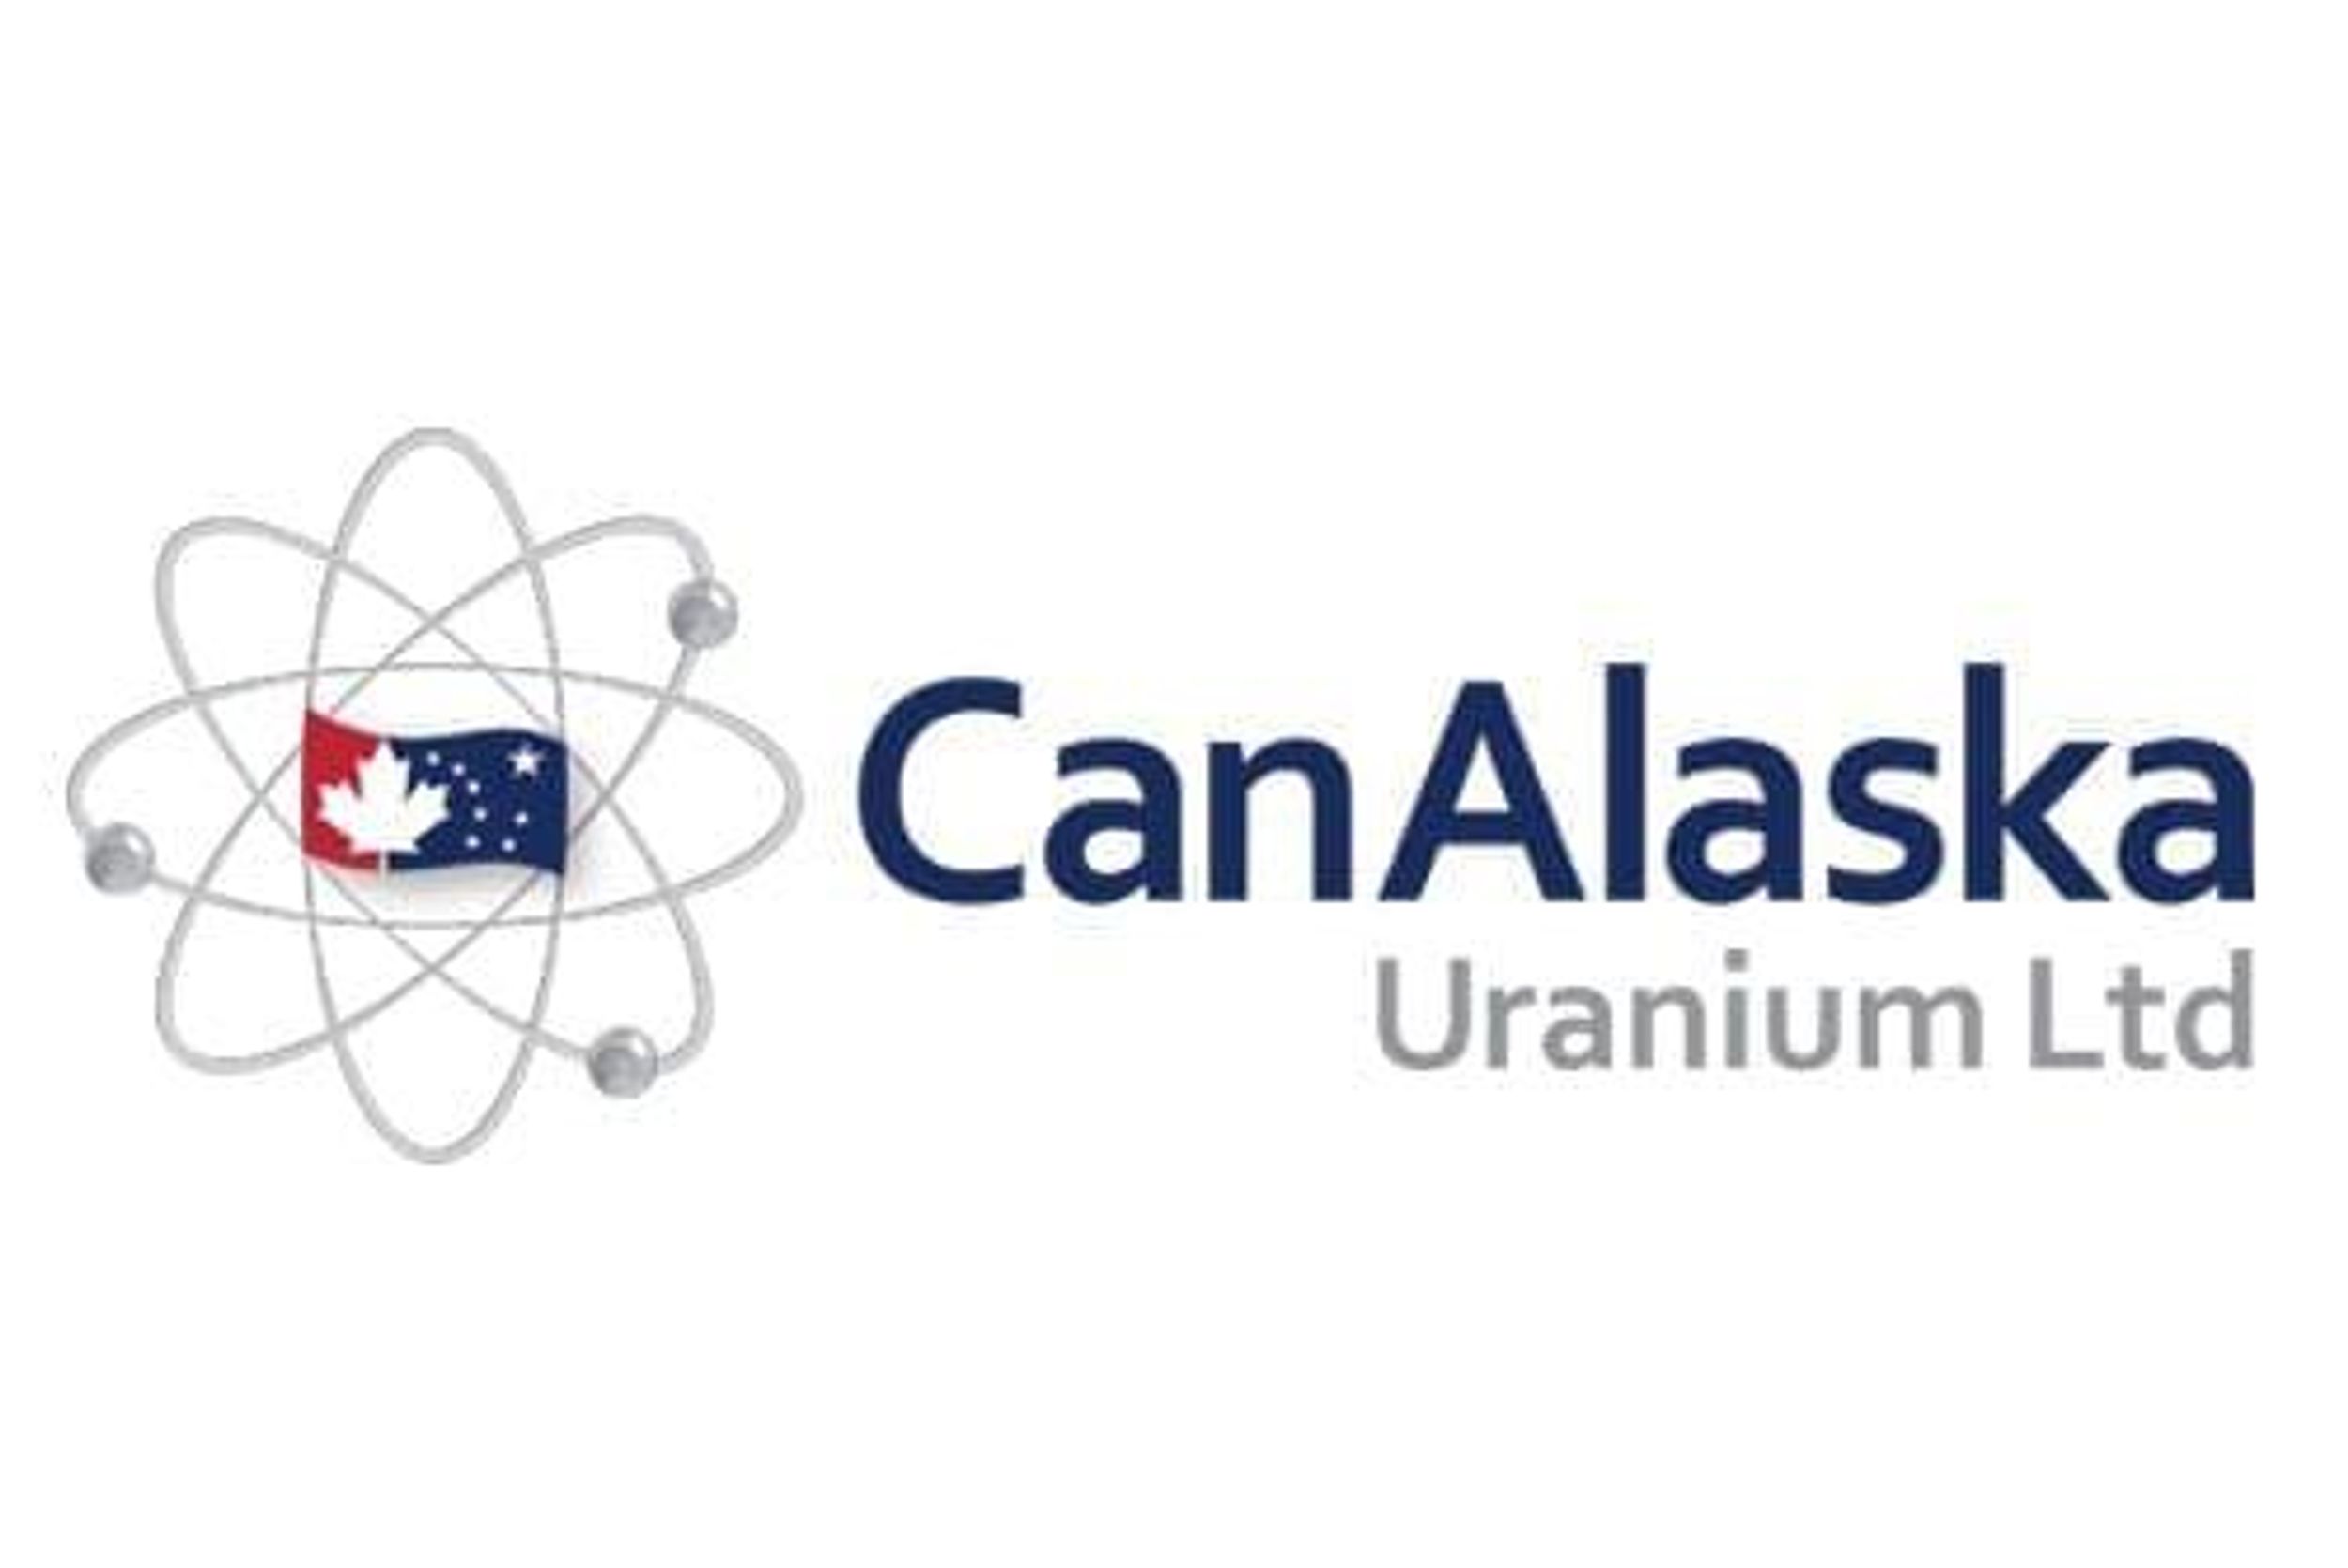 CanAlaska Partner to Spend AUD$5M for 60% of Two Uranium Projects in the Athabasca Basin